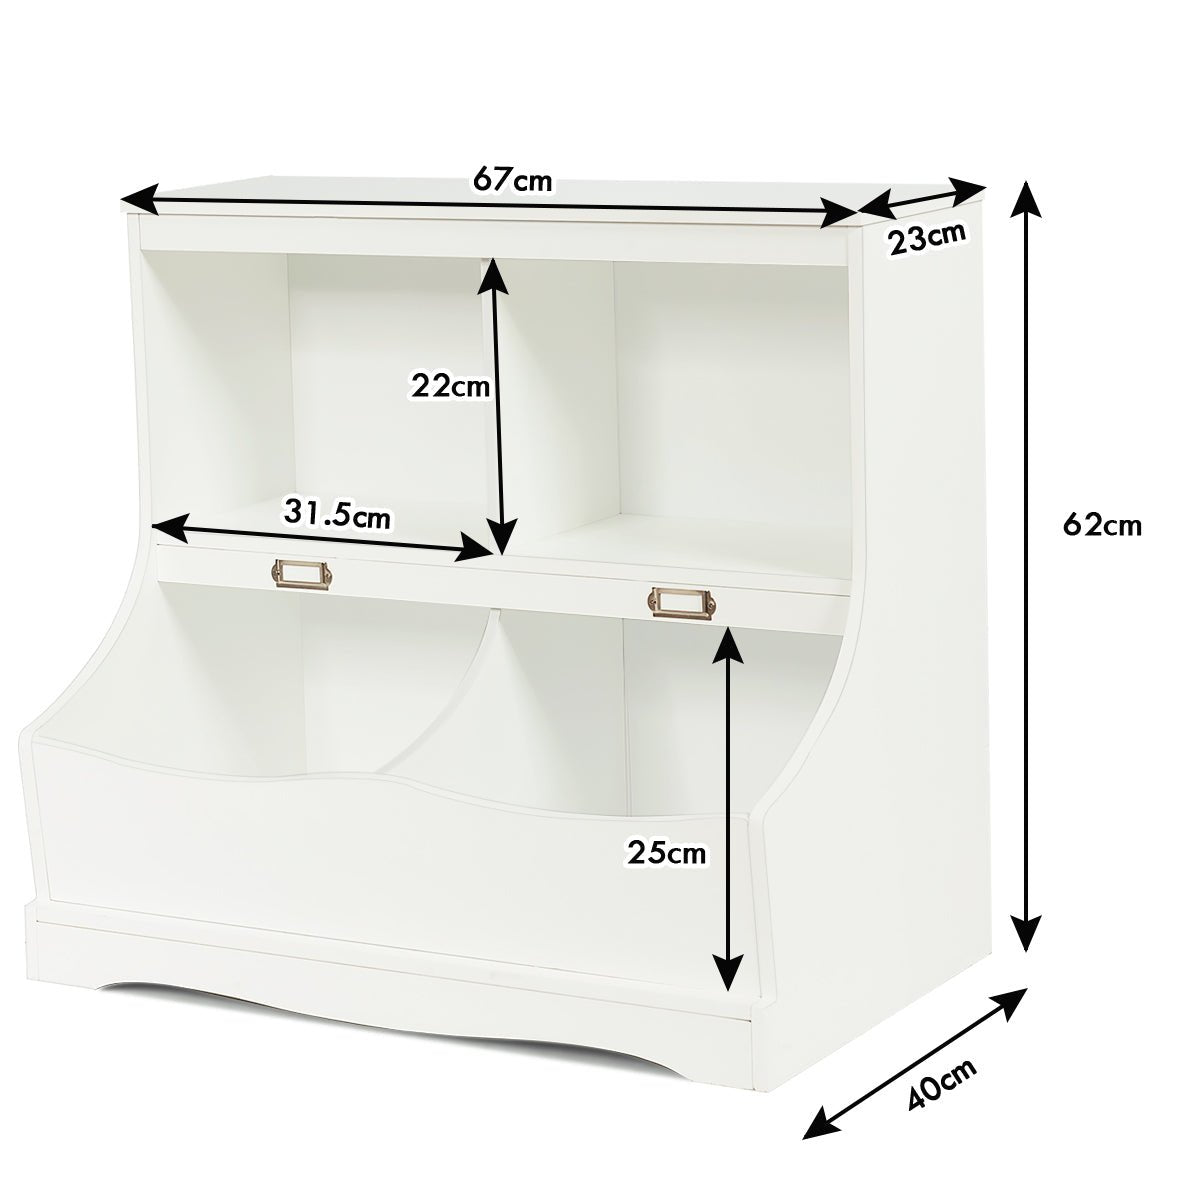 Organize Kid's Room with 2-Tier Toy Shelf - Elegant Lacquered Design